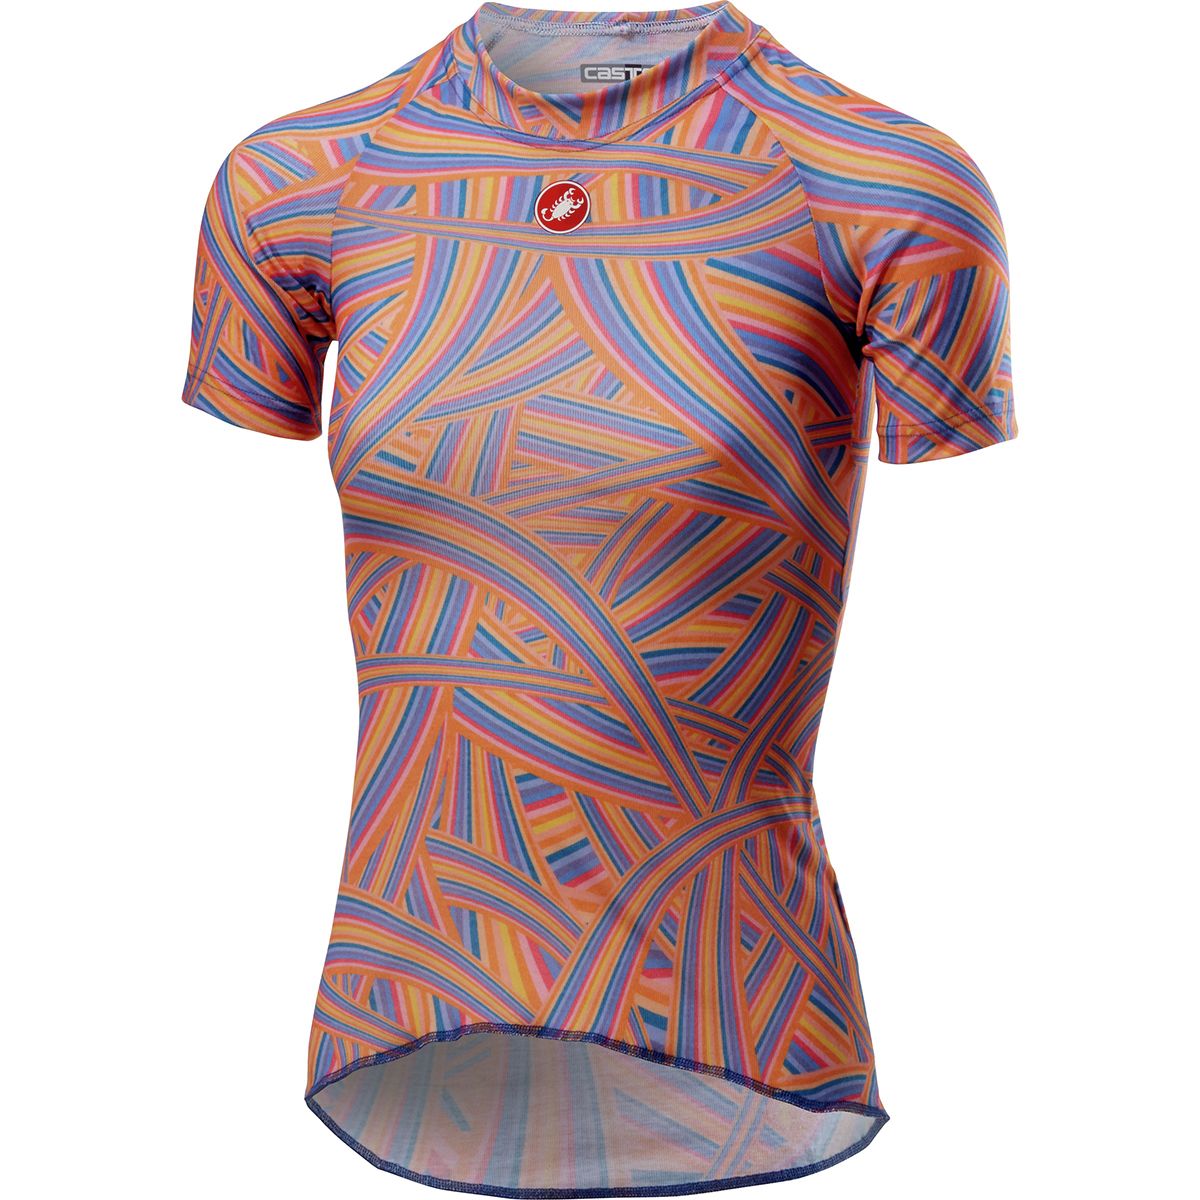 Castelli Prosecco R Short-Sleeve Base Layer Top - Women's